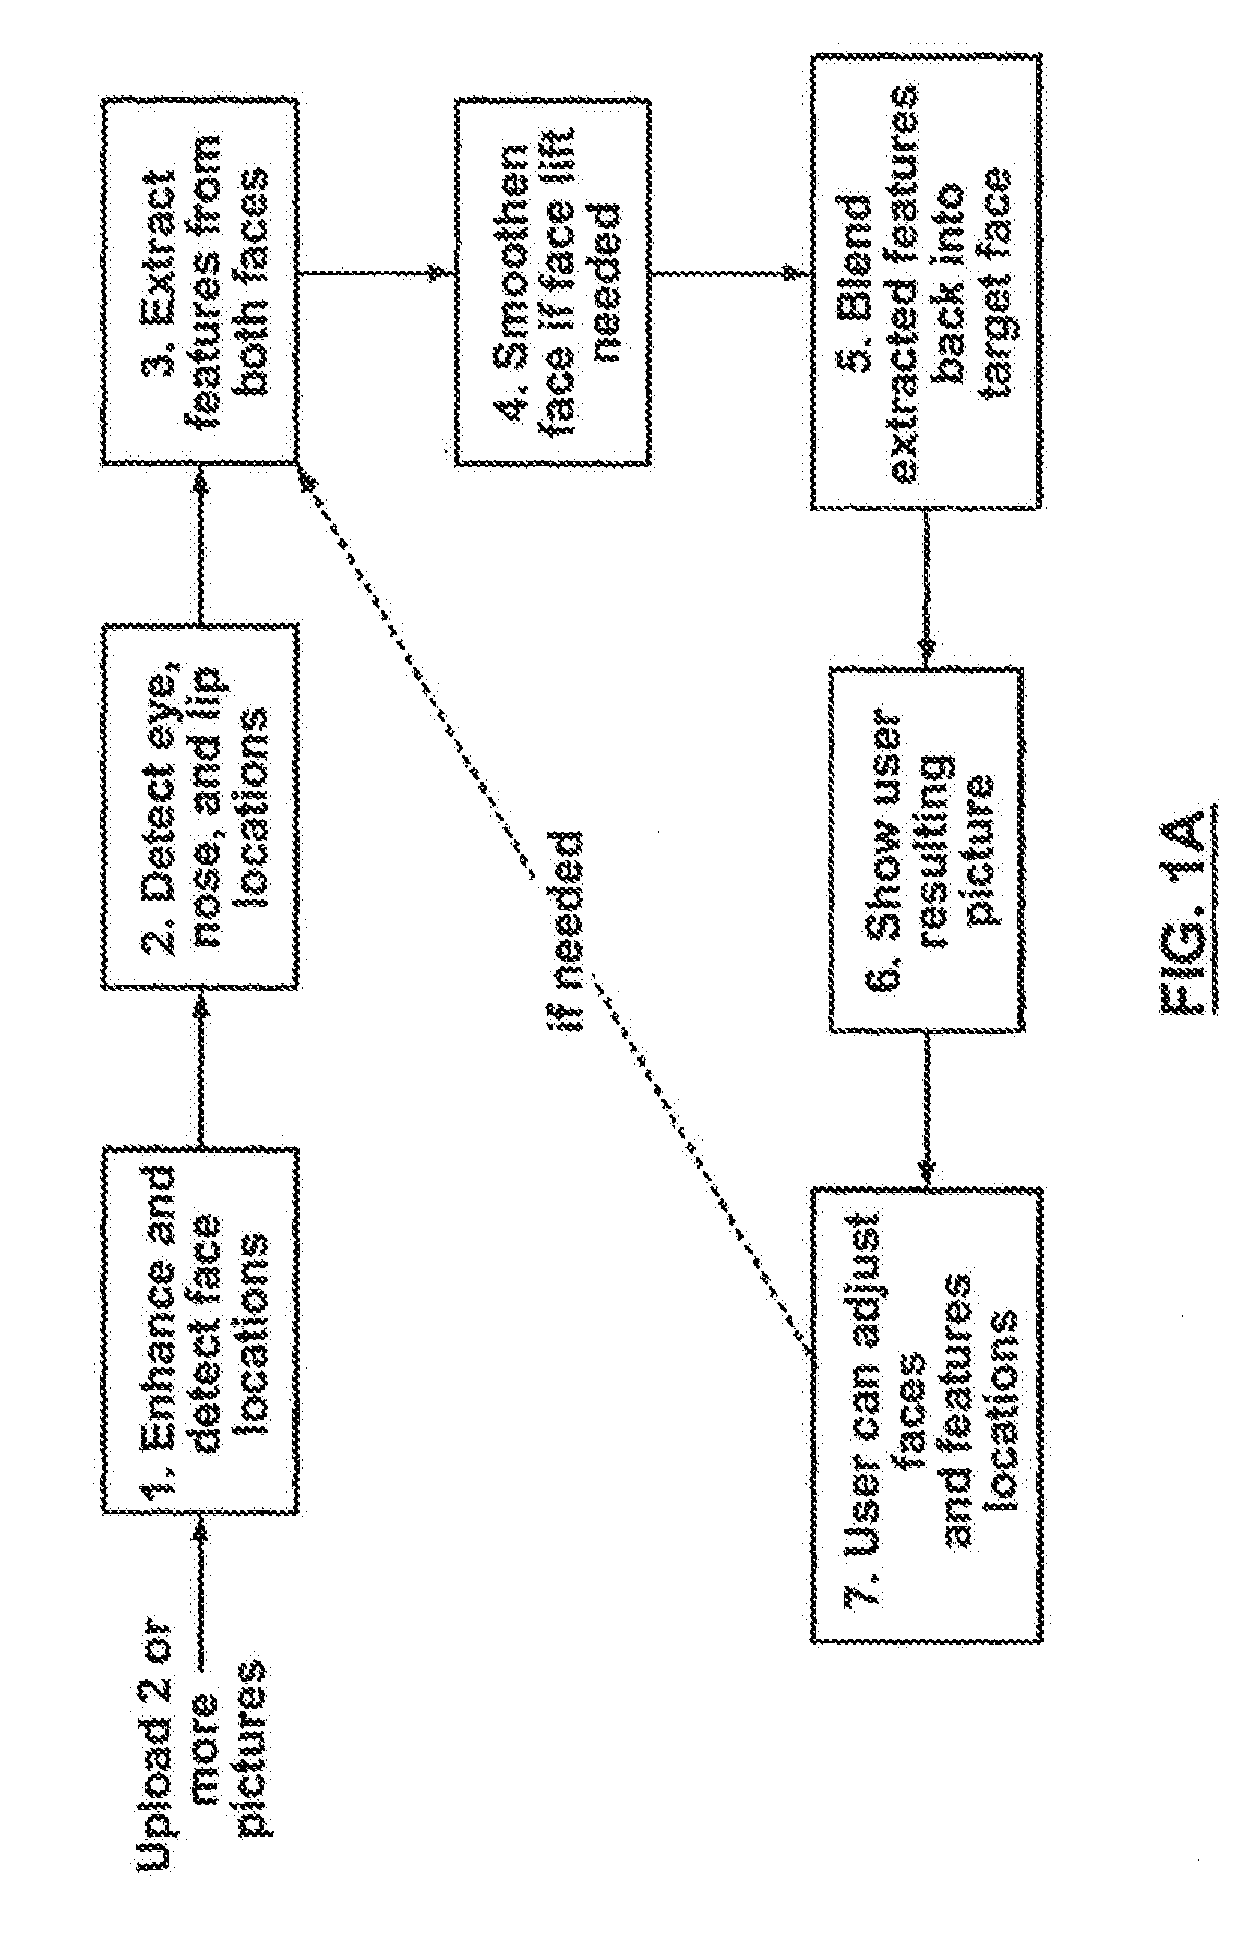 Method, system and computer program product for automatic and semi-automatic modificatoin of digital images of faces